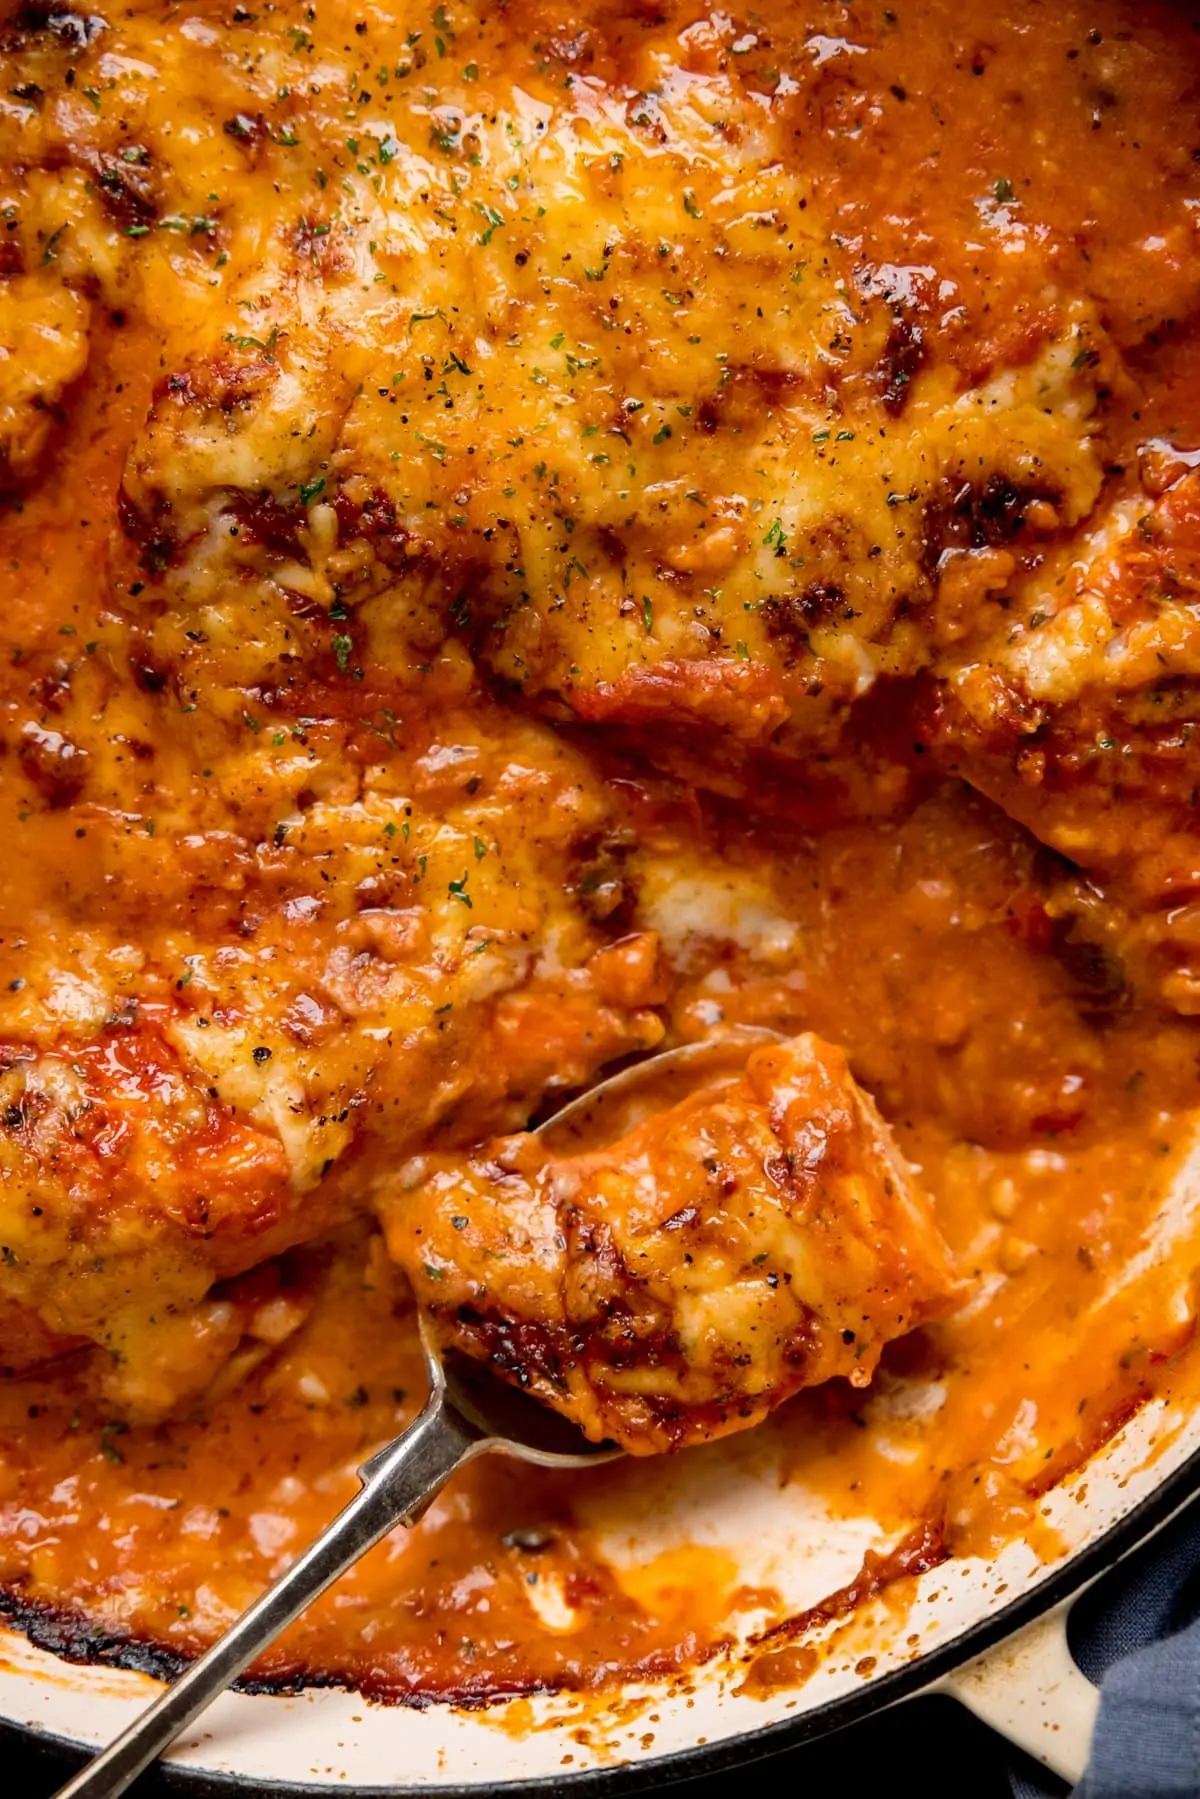 Close up of a spoonful of chicken being taken from a pan of lasagne-style chicken bake.